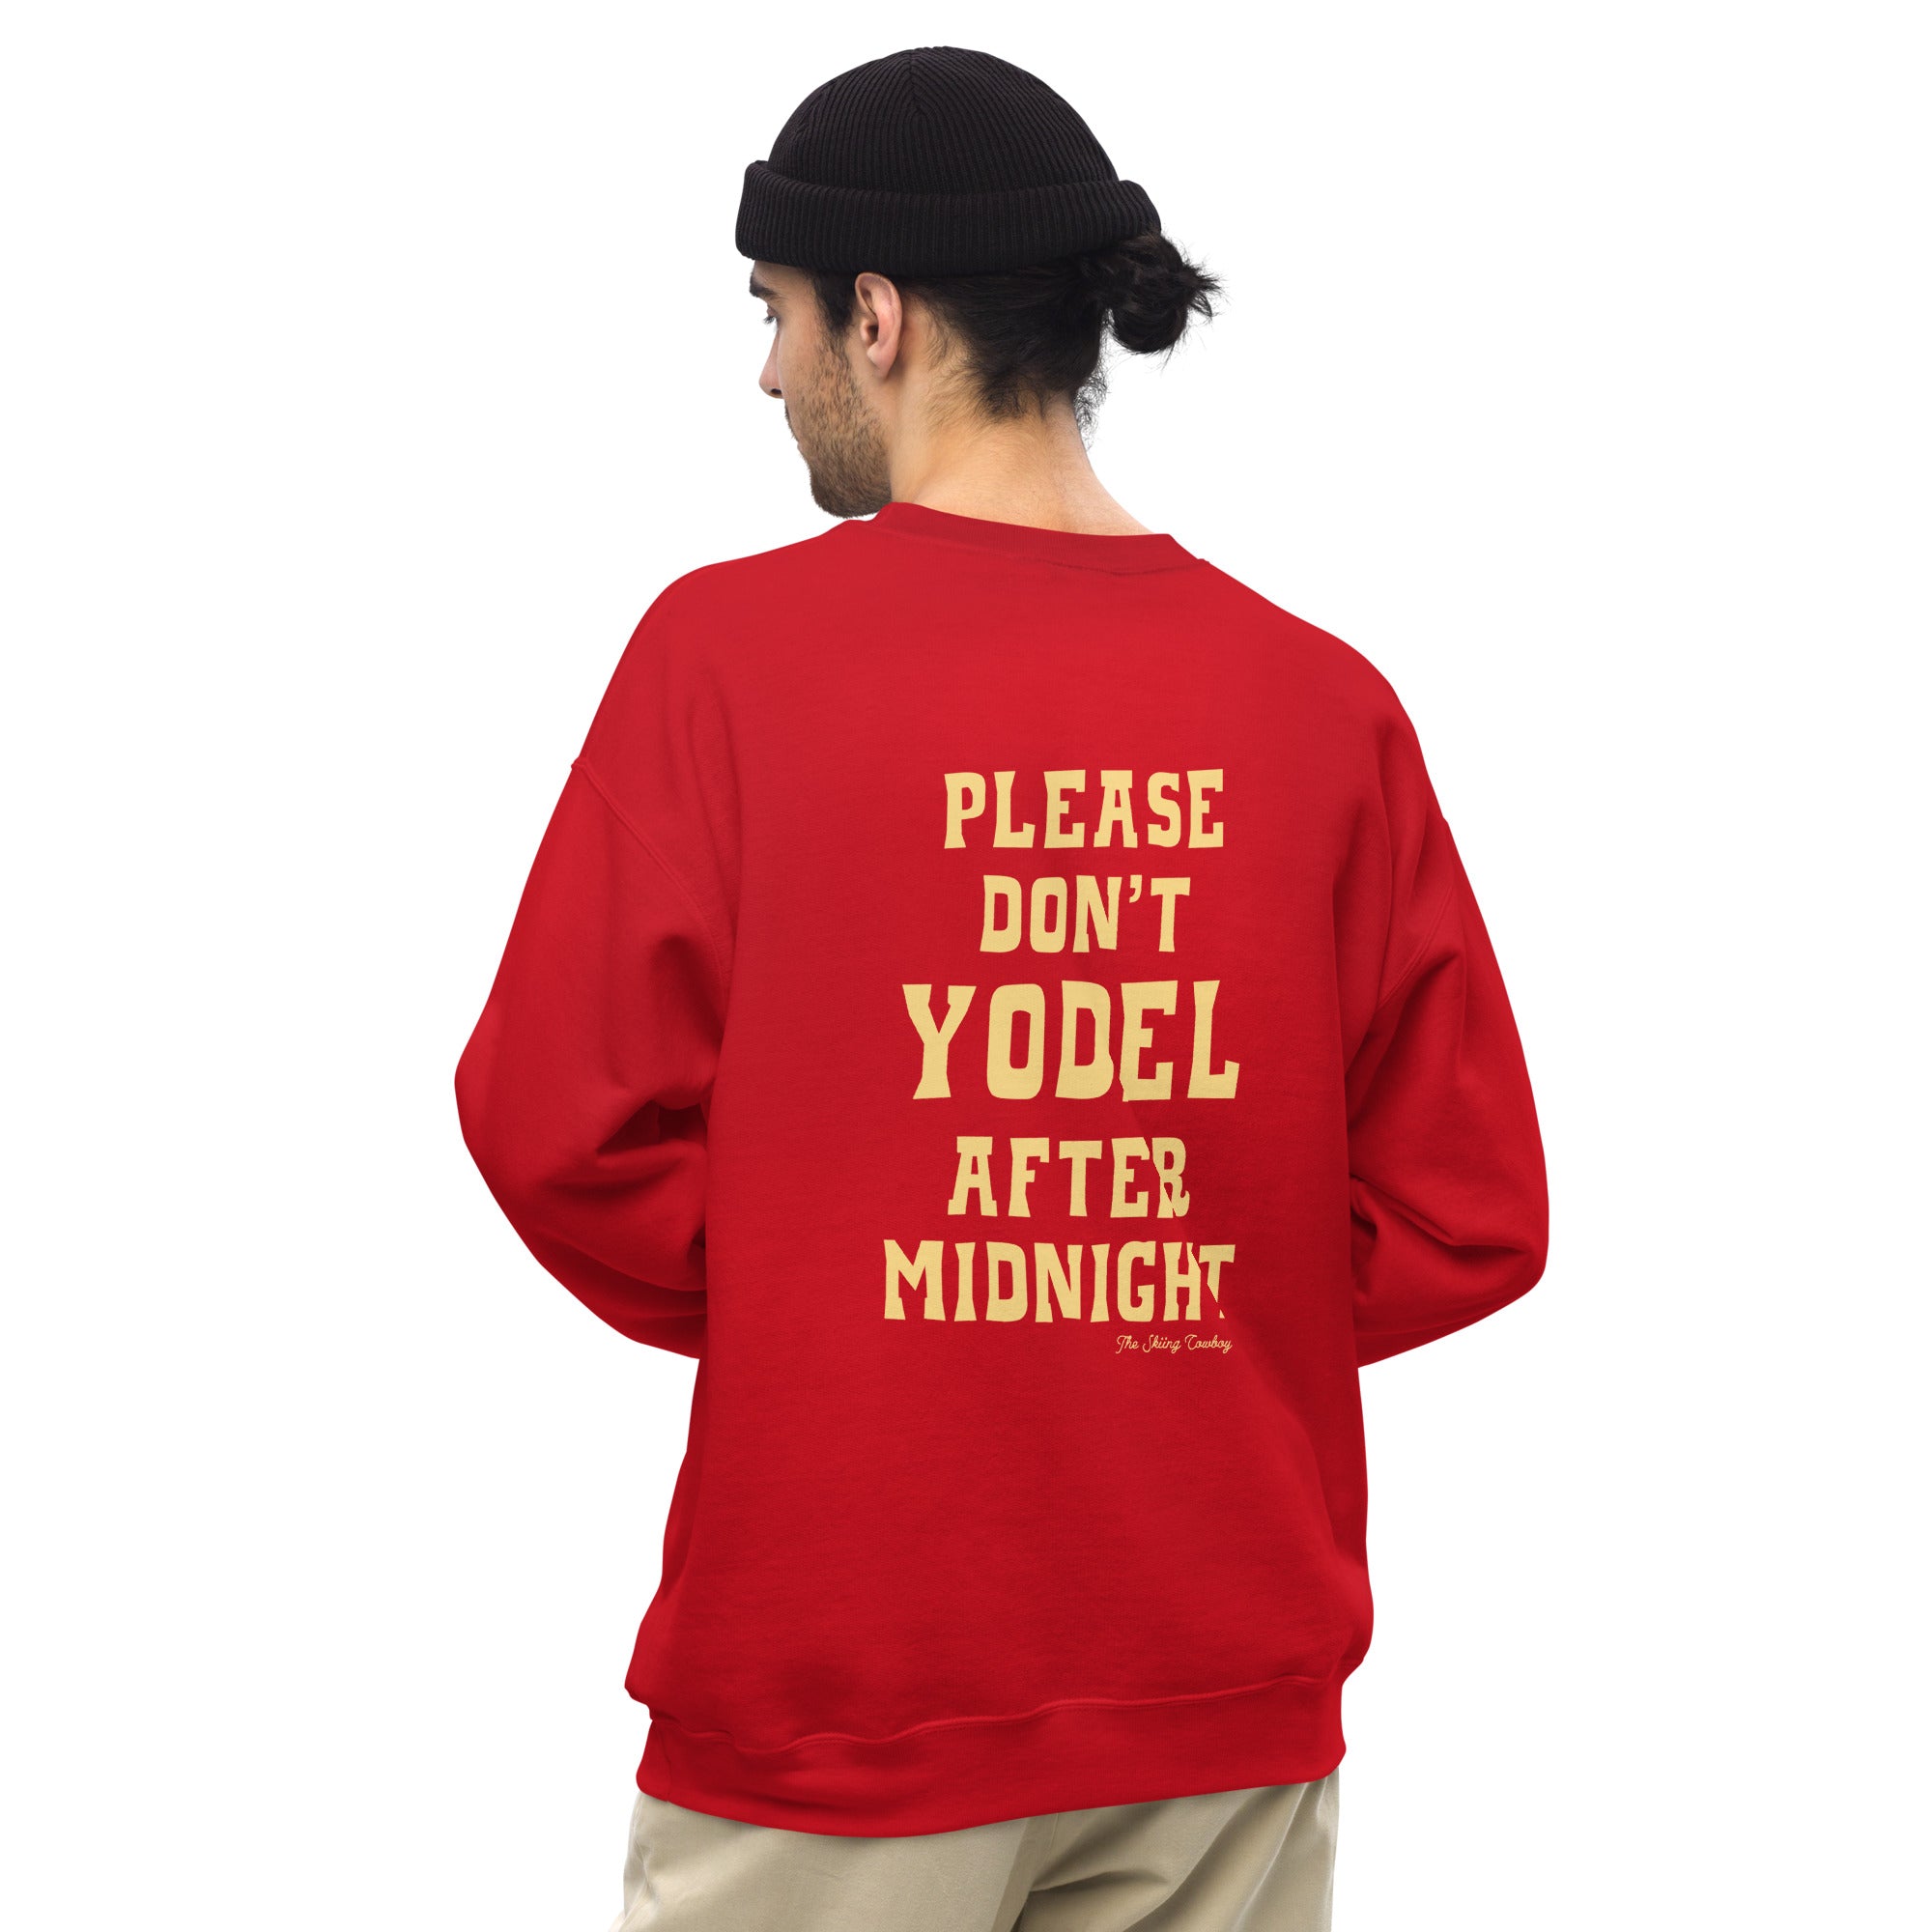 Unisex Sweatshirt Don't Yodel After Midnight light text (front & back)